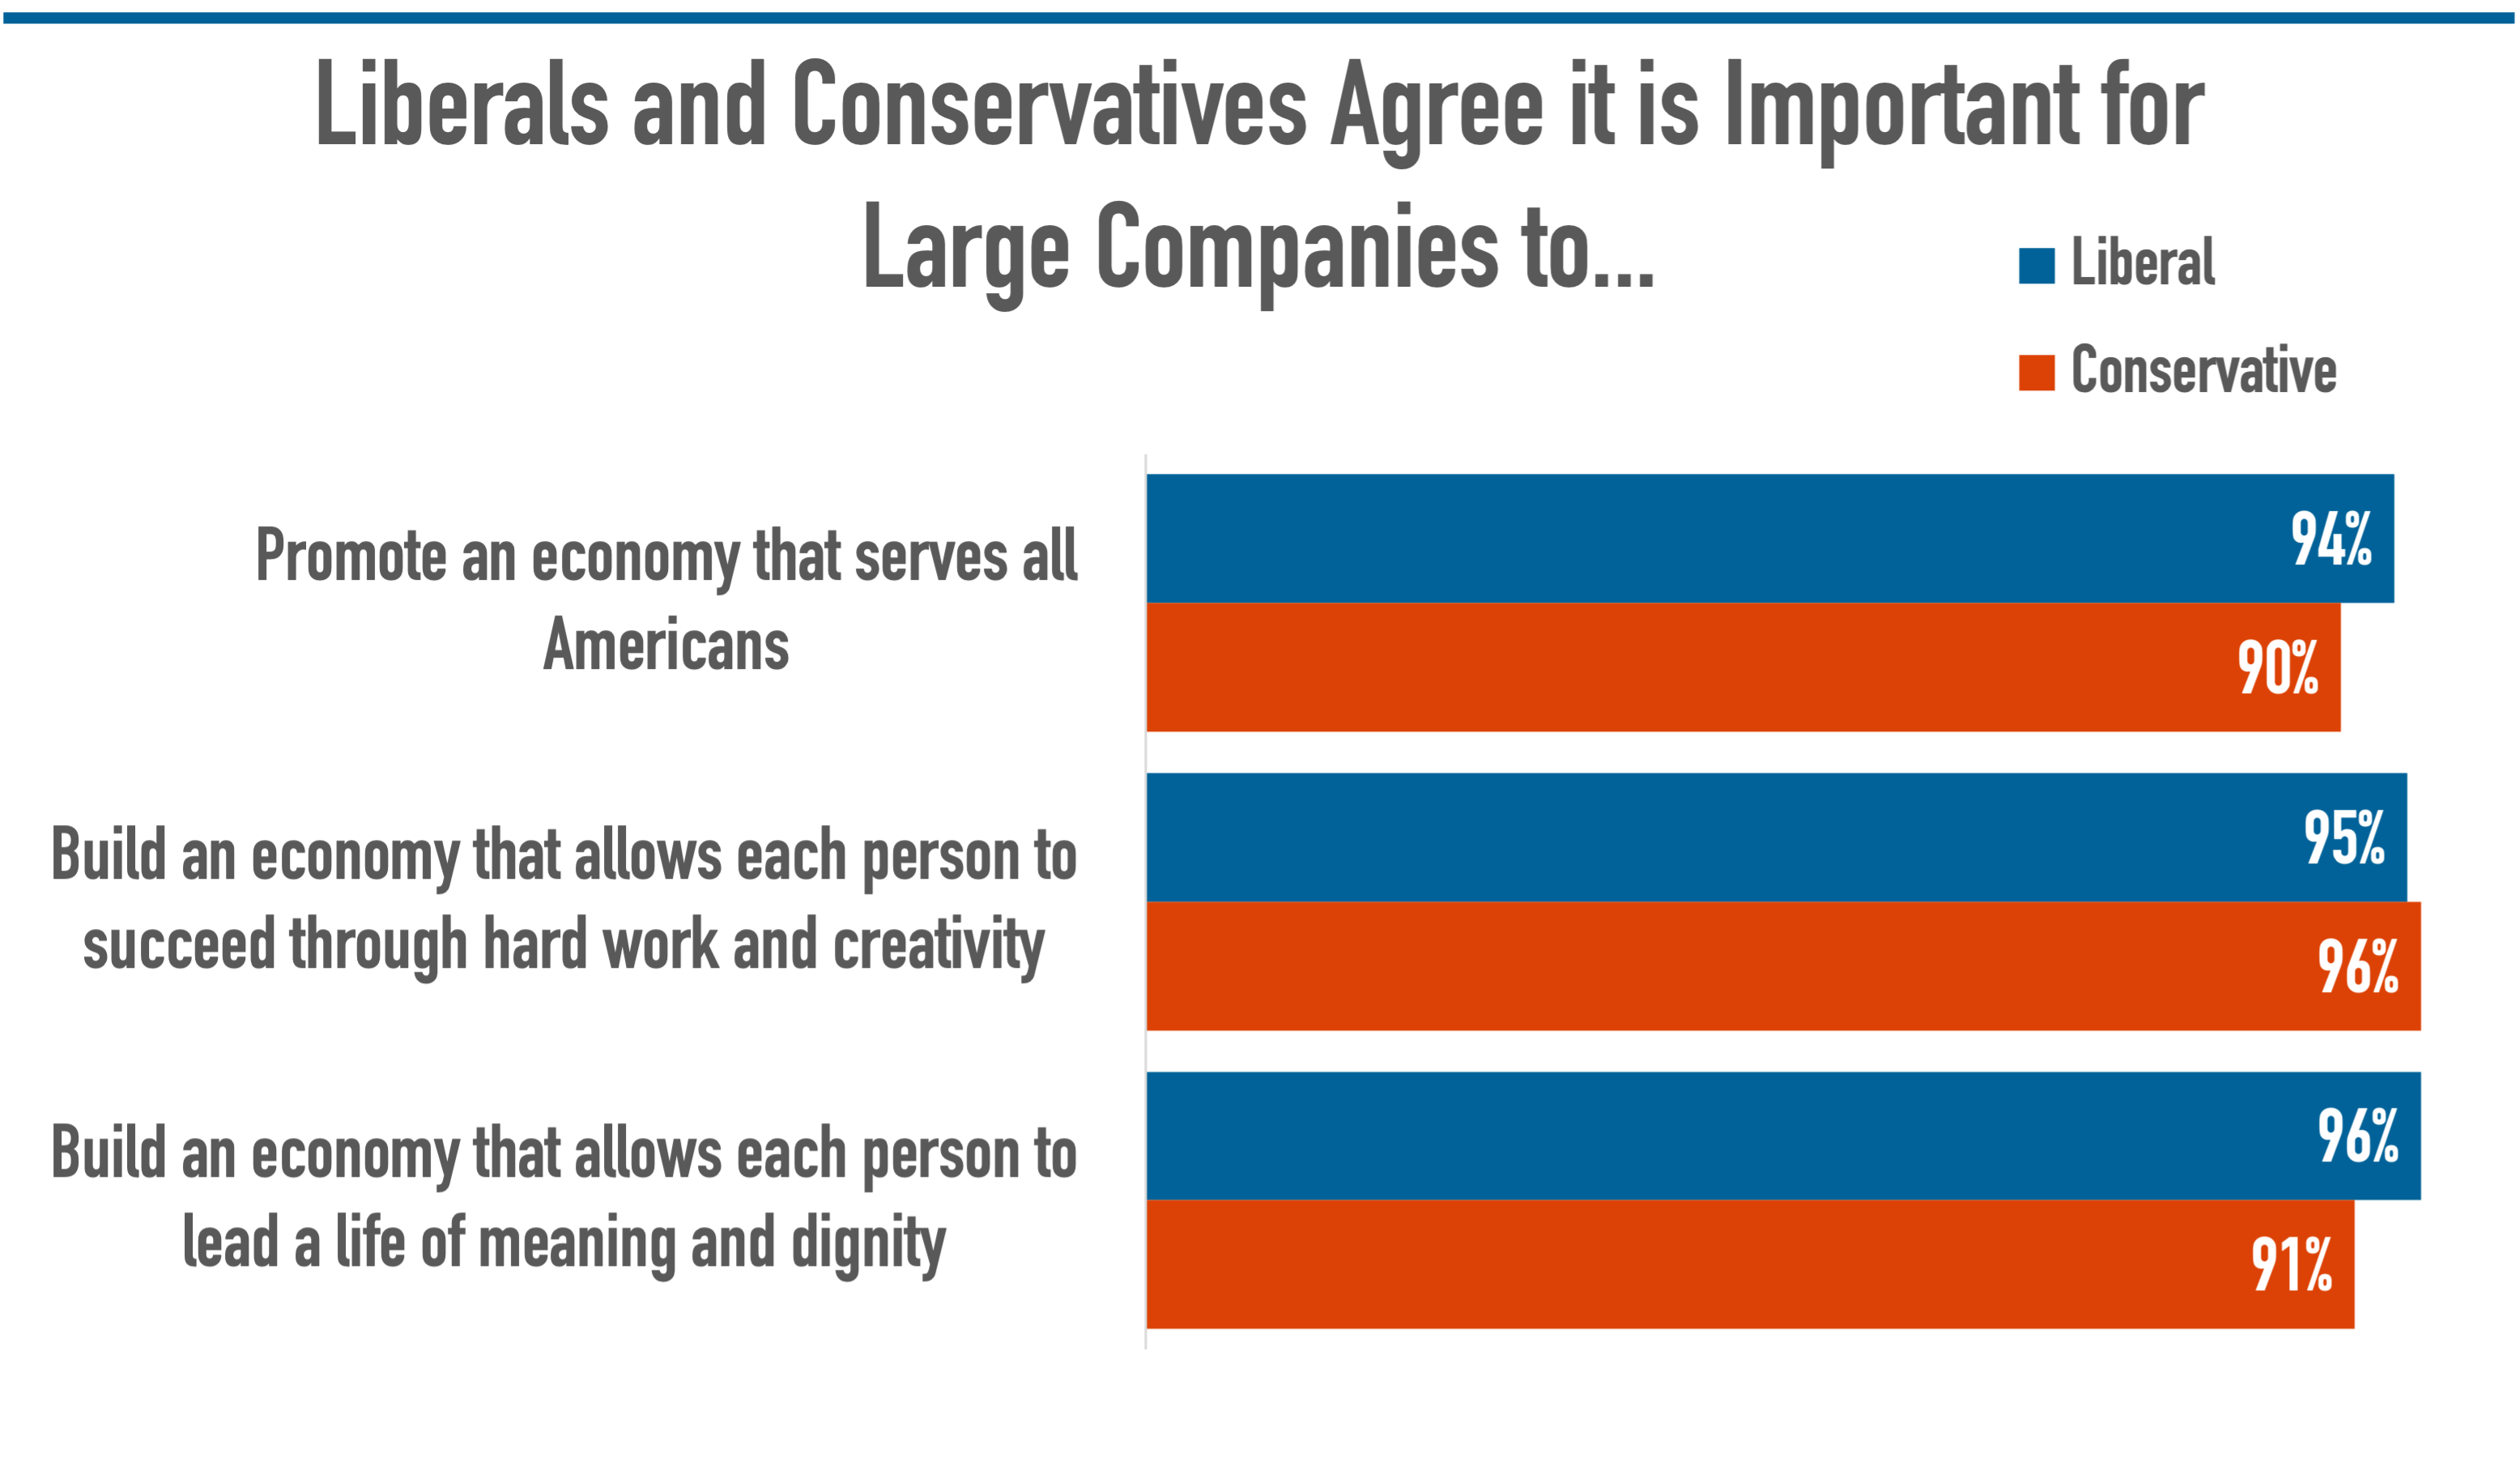 Liberals and Conservatives Agree Corporate America Needs to